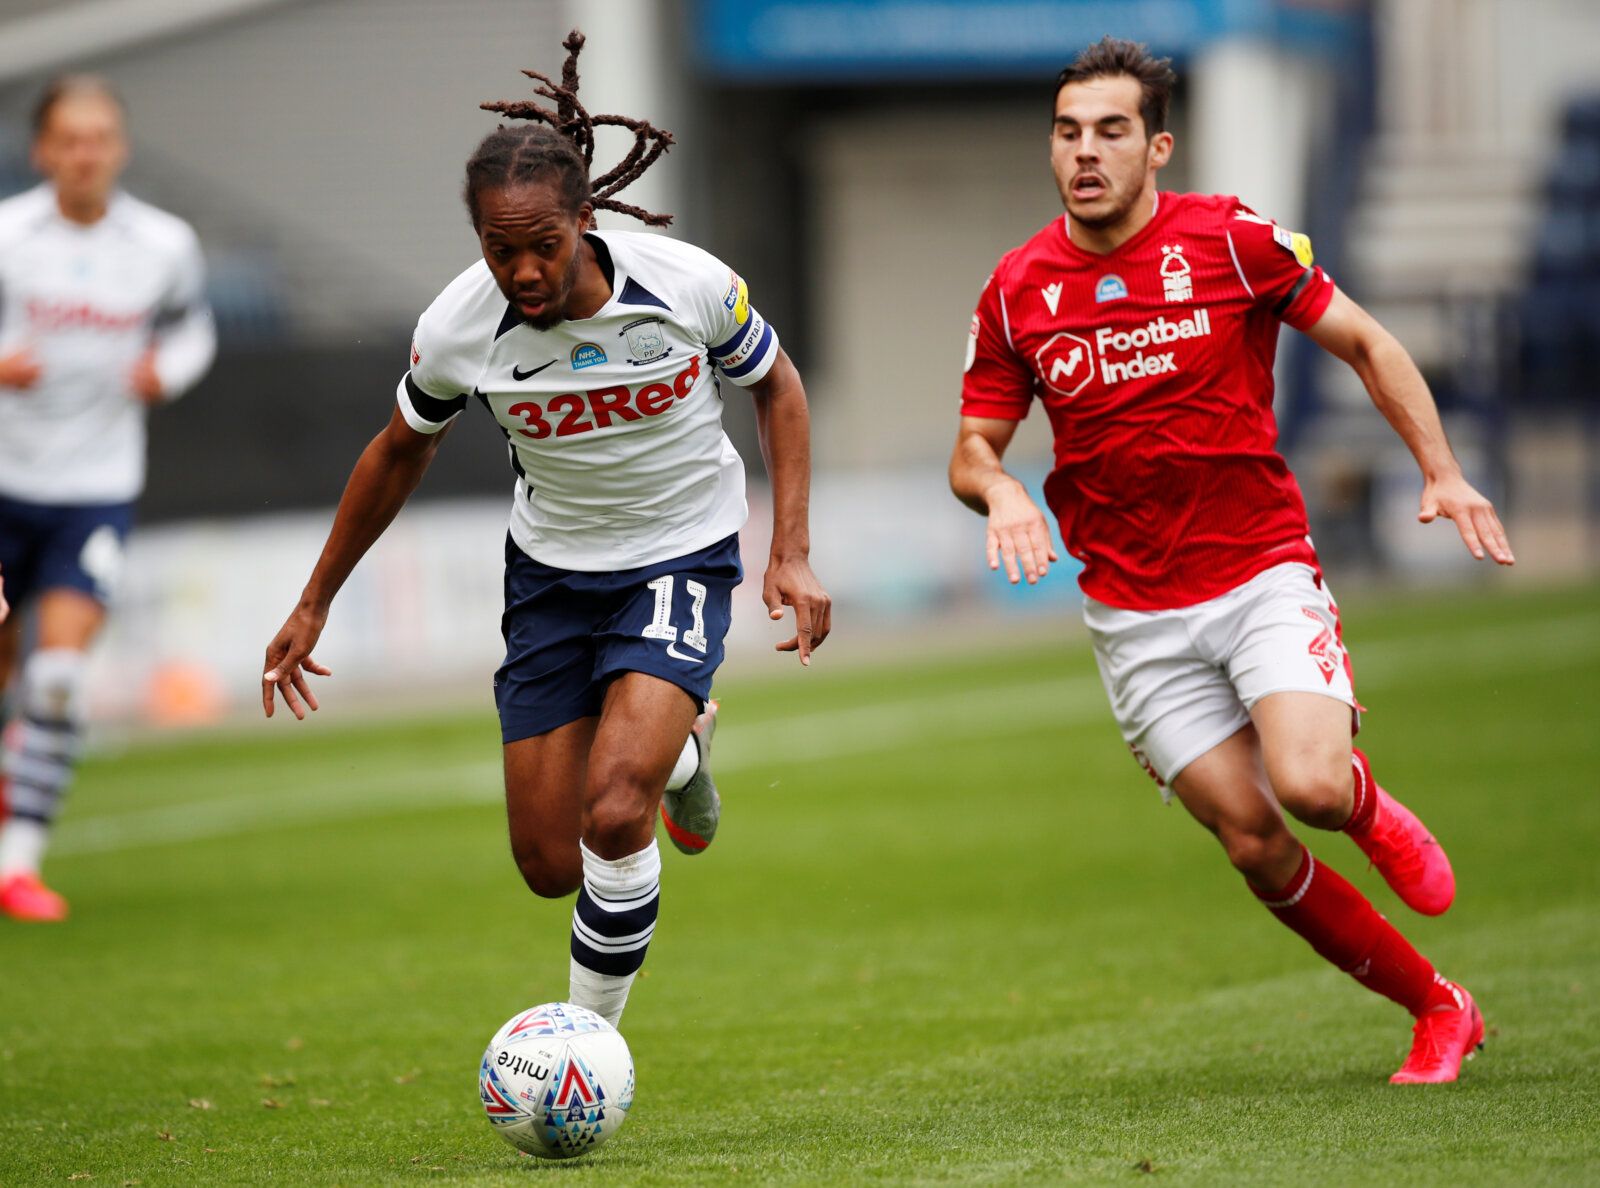 Soccer Football - Championship - Preston North End v Nottingham Forest - Deepdale, Preston, Britain - July 11, 2020   Preston North End's Daniel Johnson in action with Nottingham Forest's Yuri Ribeiro, as play resumes behind closed doors following the outbreak of the coronavirus disease (COVID-19)   Action Images/Andrew Boyers    EDITORIAL USE ONLY. No use with unauthorized audio, video, data, fixture lists, club/league logos or "live" services. Online in-match use limited to 75 images, no video